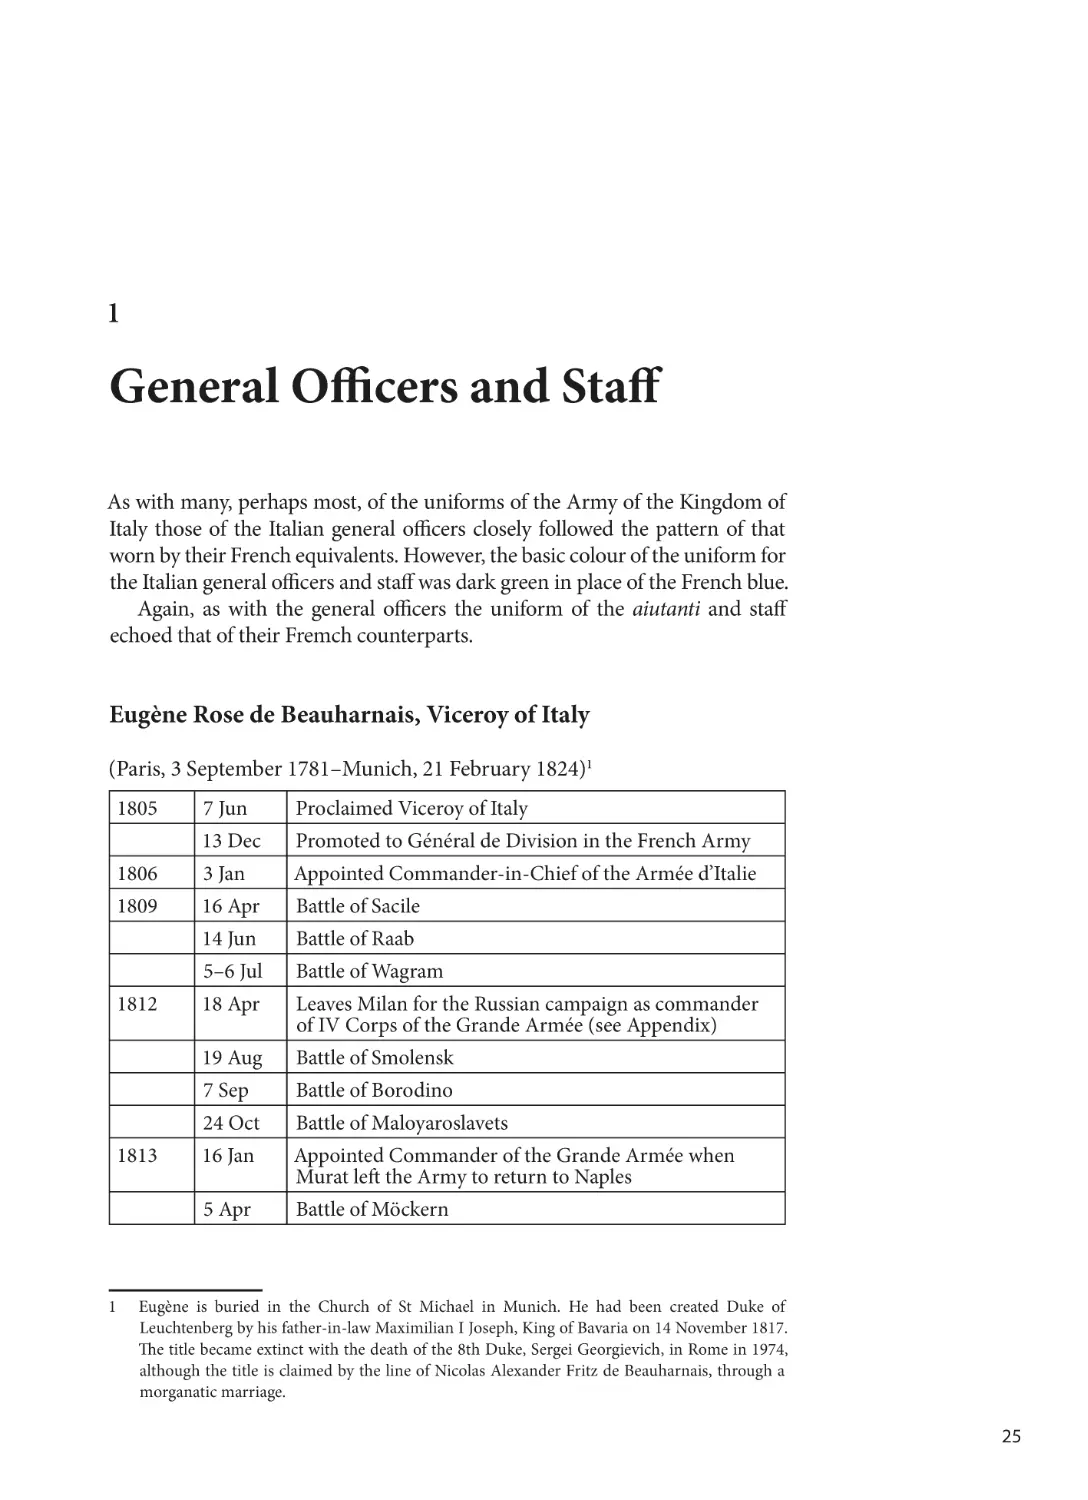 1. General Ofcers and Staff